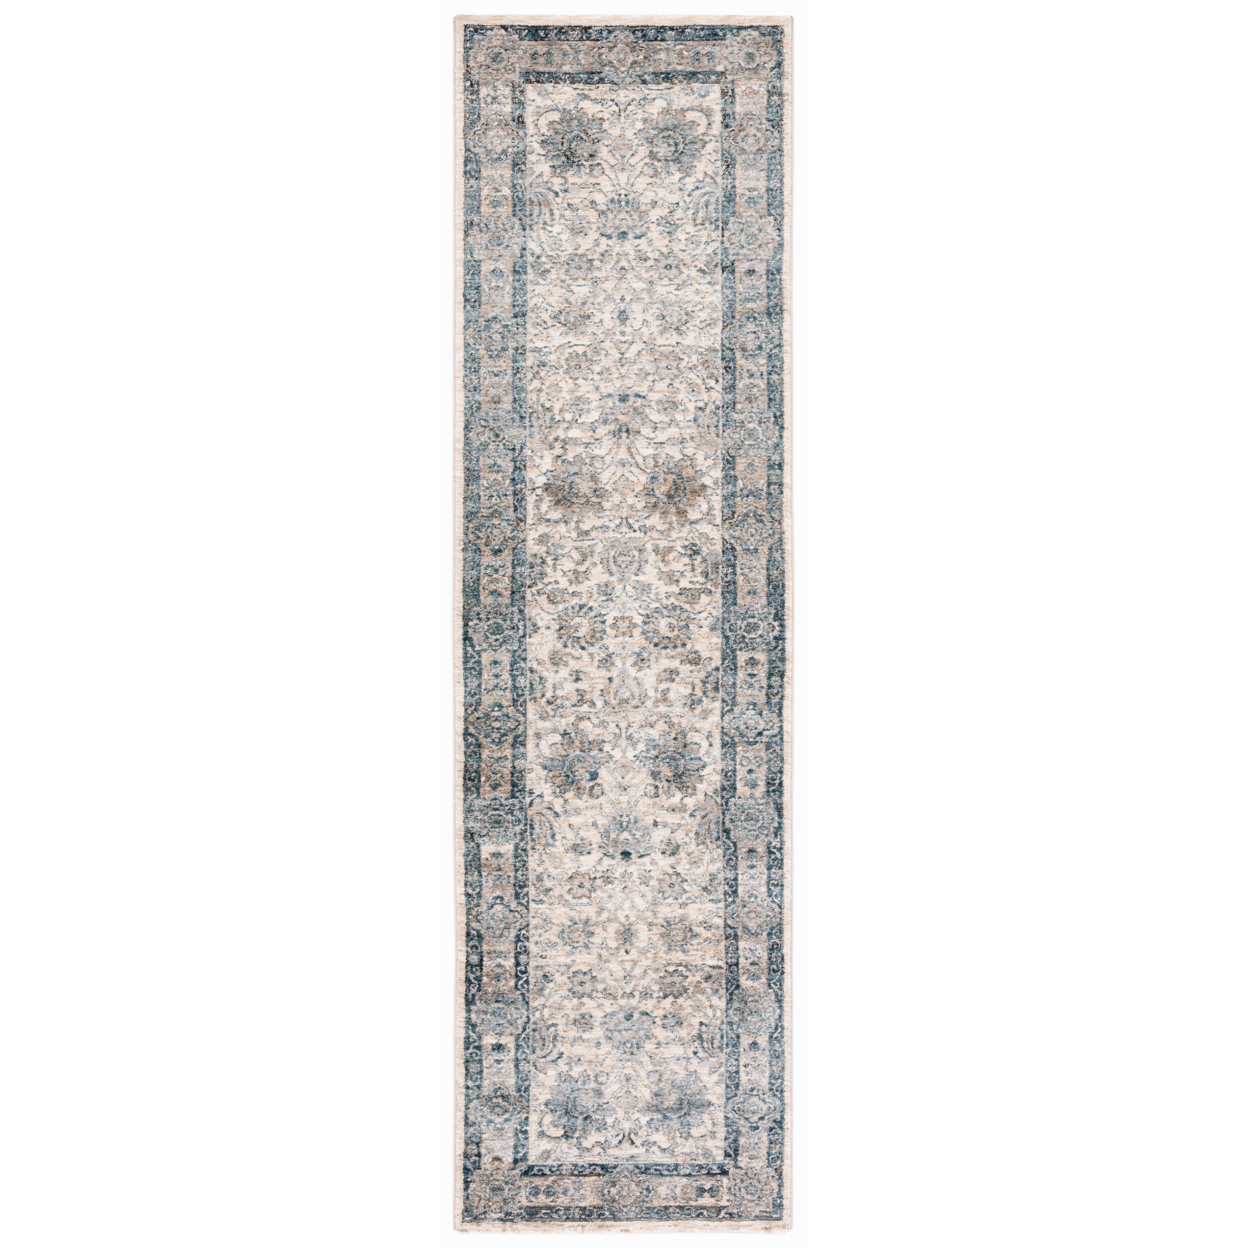 SAFAVIEH Valencia Collection VAL570A Ivory / Blue Rug - 2' X 8'